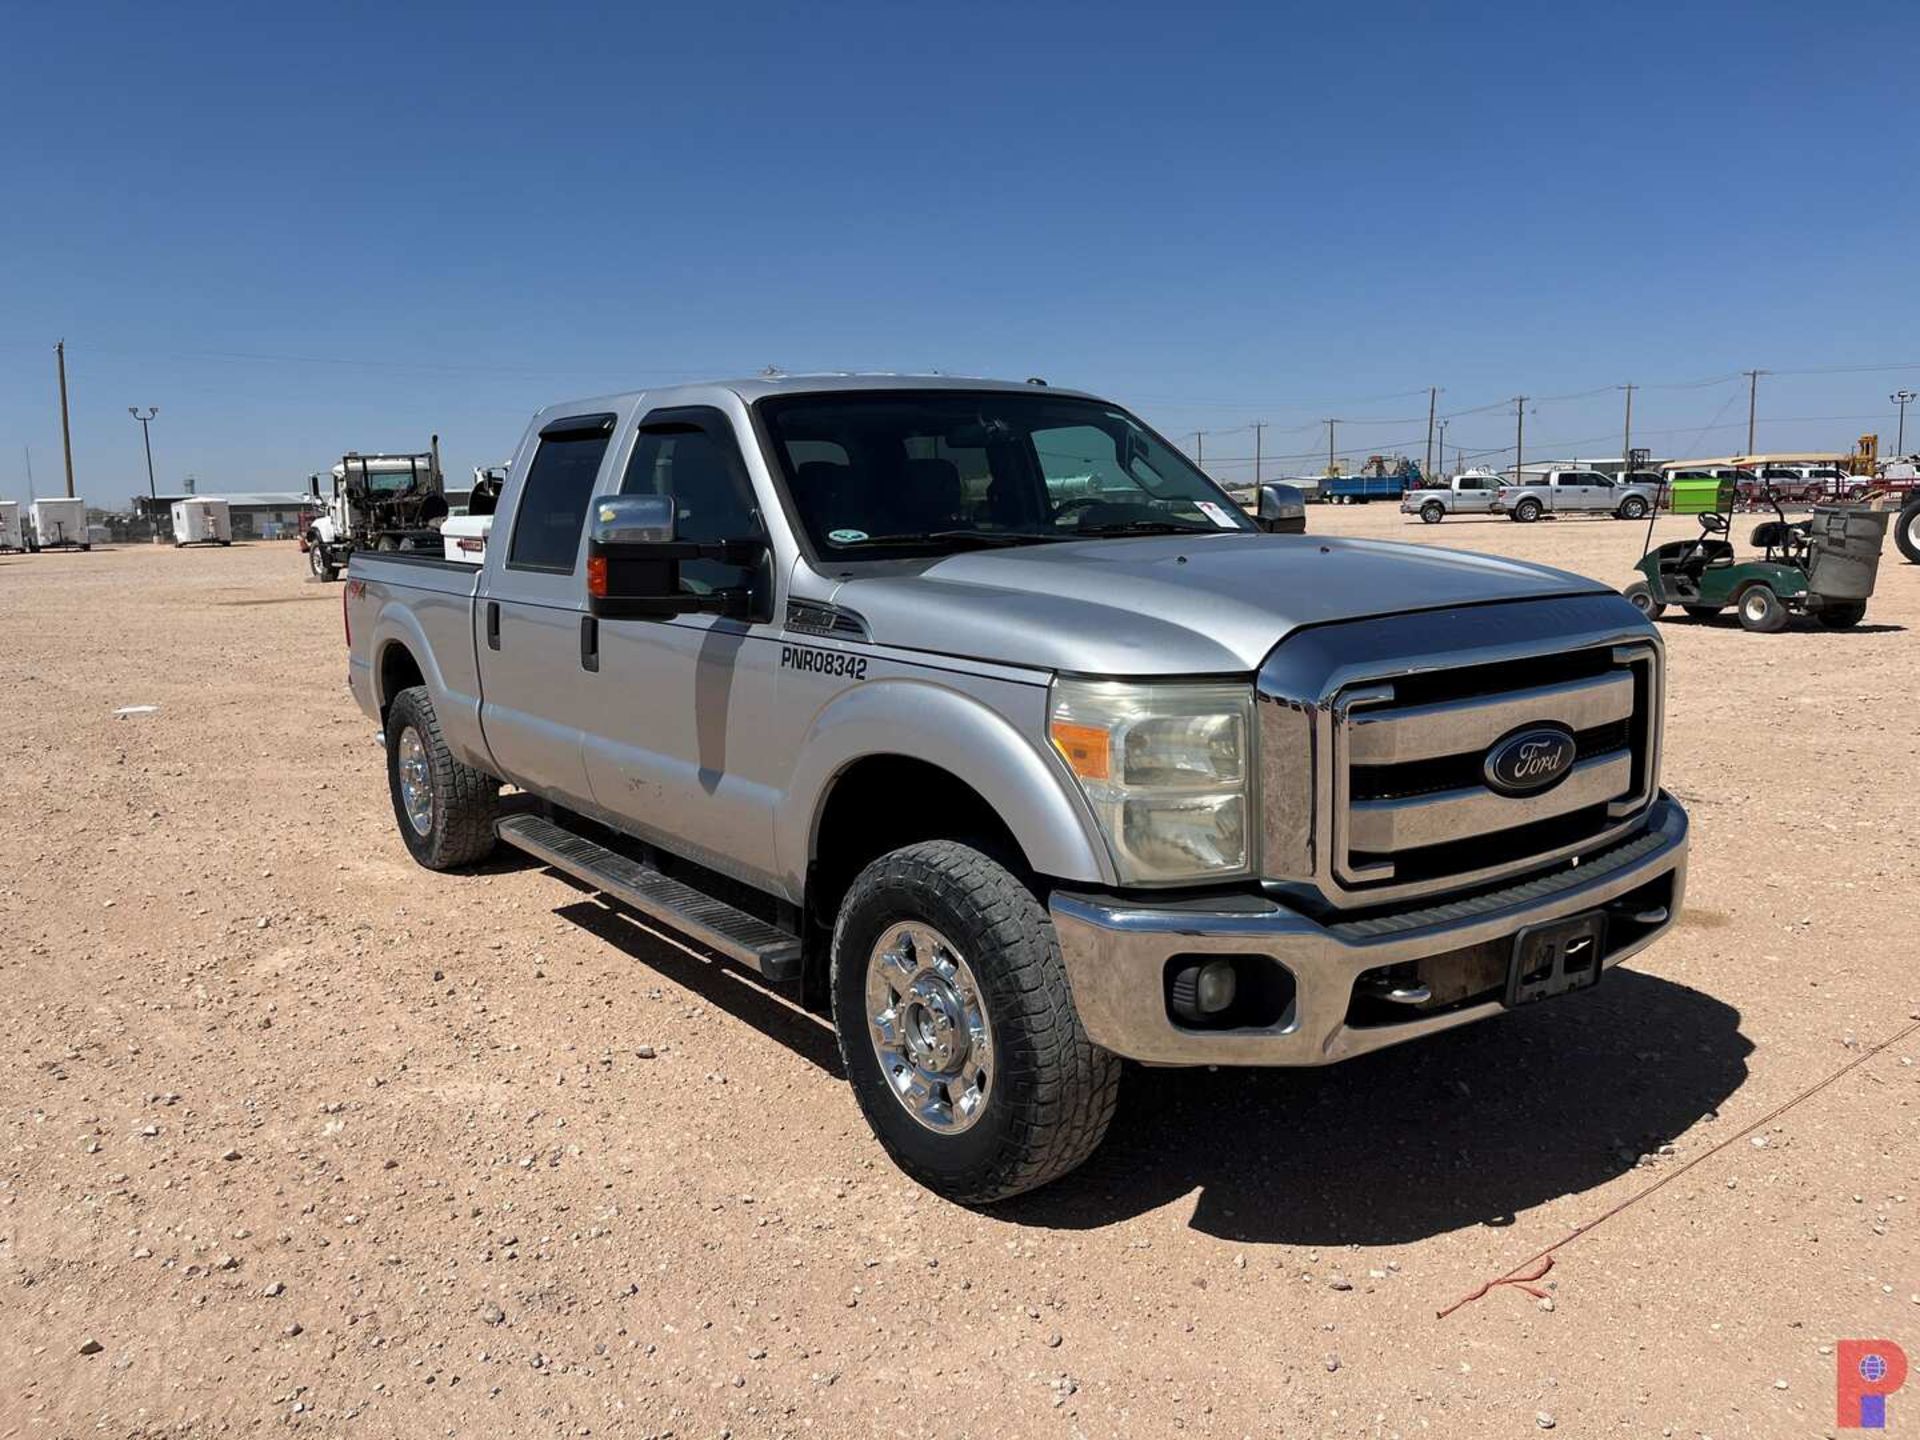 2015 FORD F-250 CREW CAB PICKUP TRUCK - Image 2 of 7